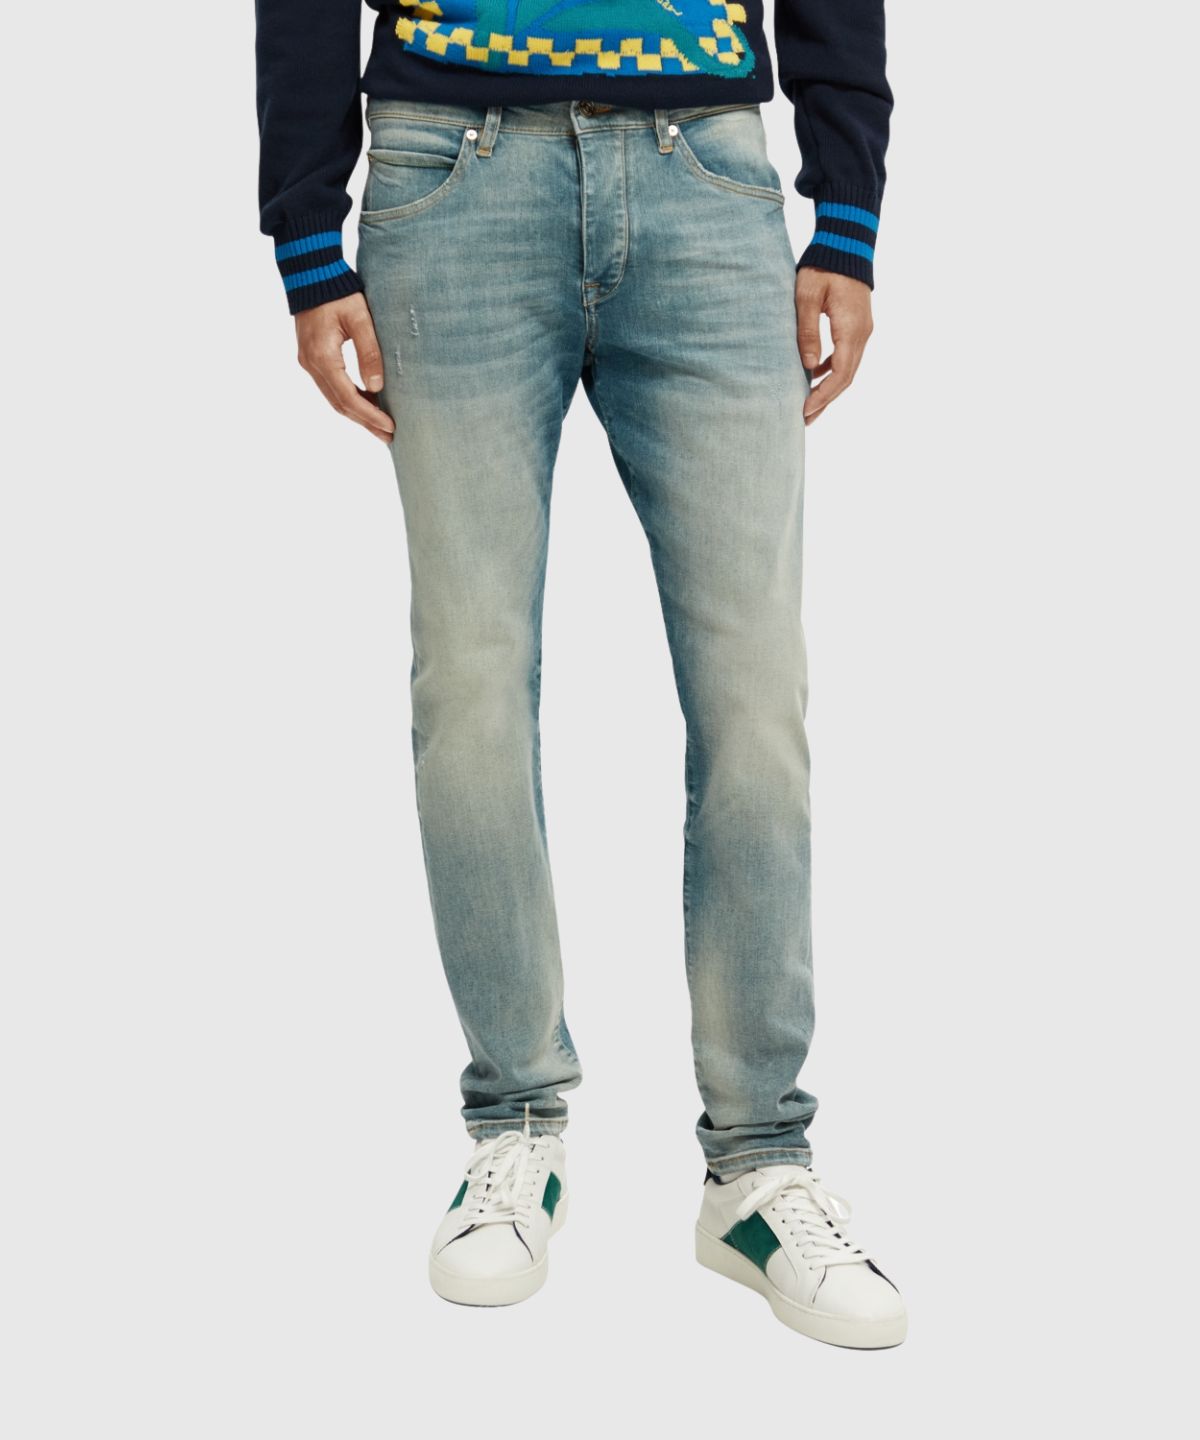 The Singel slim tapered jeans — Cut The Grass